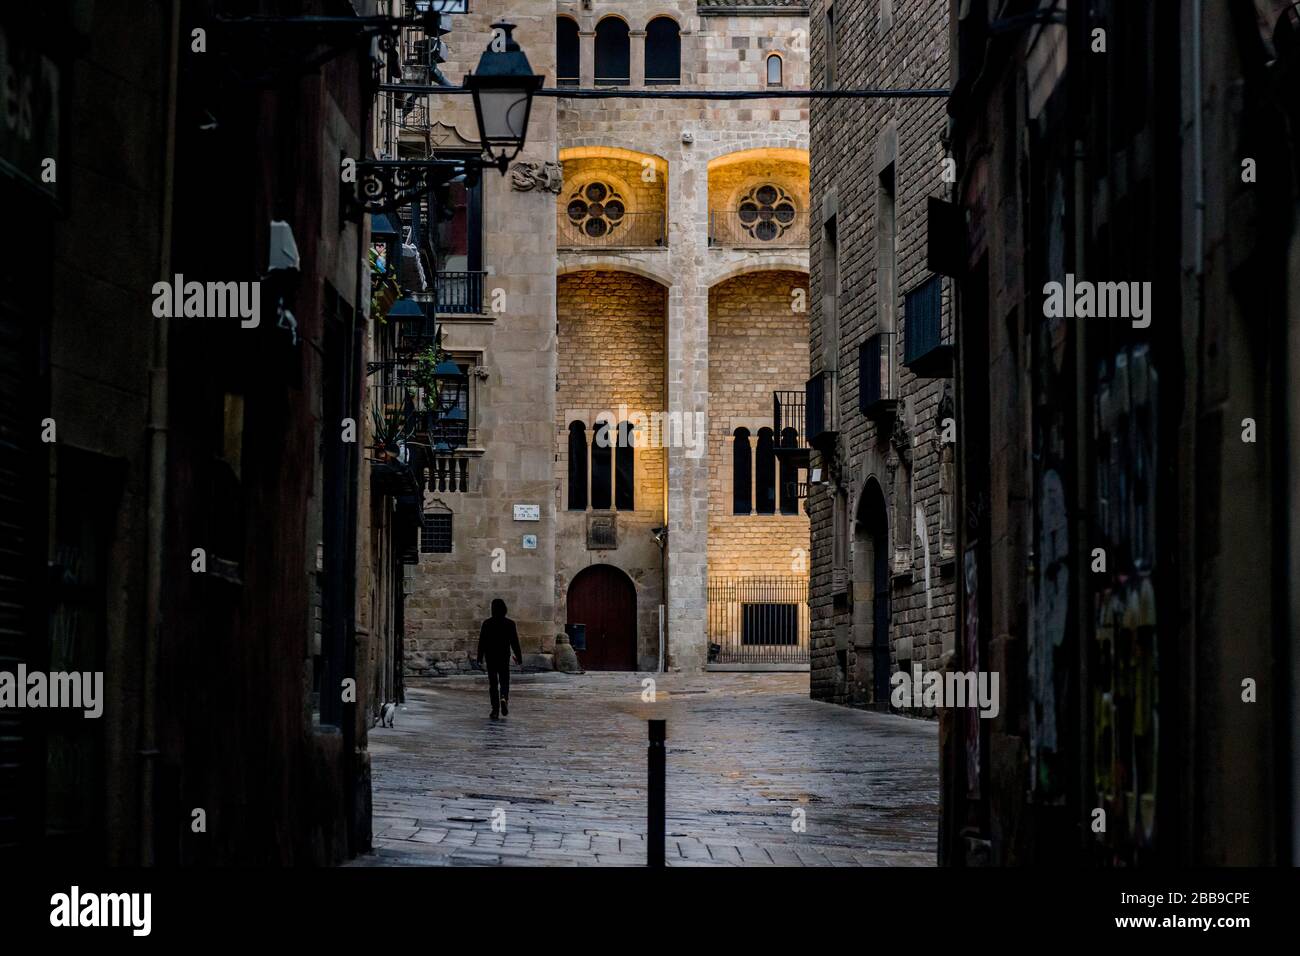 Barcelona, Catalonia, Spain. 30th March 2020. A man walks the empty streets of Barcelona's Gothic Quarter under the rain. Daily coronavirus deaths fall slightly with 812 Covid-19 victims in the last 24 hours in Spain, Spanish government has ordered new lockdown restrictions. Credit:Jordi Boixareu/Alamy Live News Stock Photo